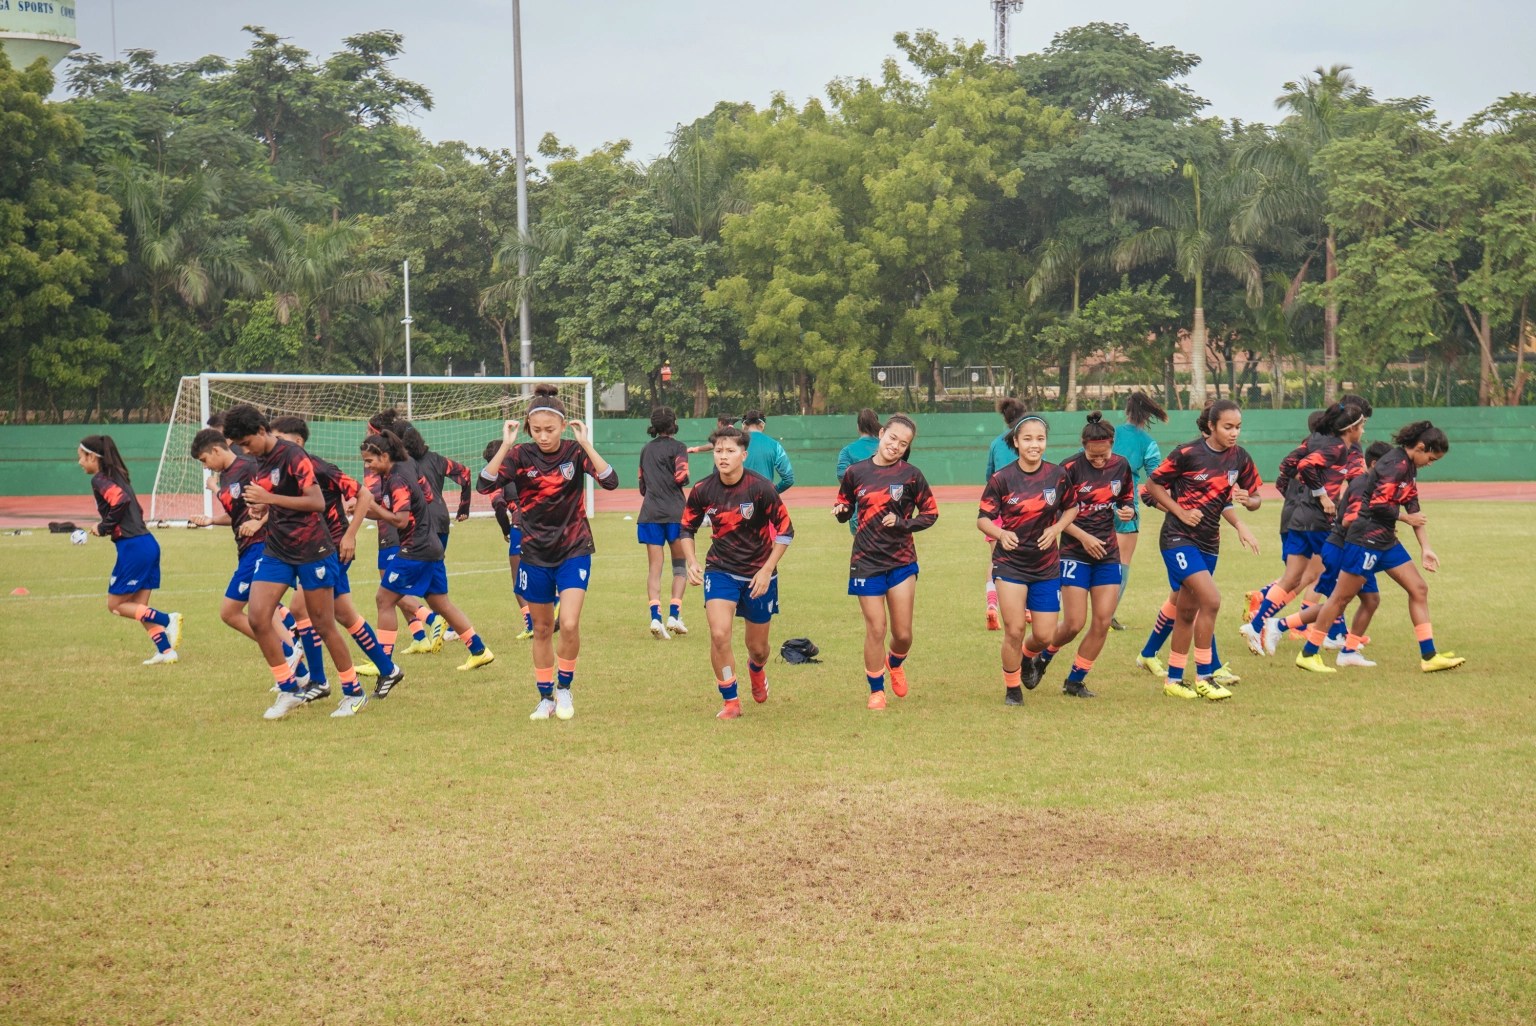 FIFA U17 Women’s World Cup: Indian U17 Women’s Football Team stalwarts to look out for-Check Out